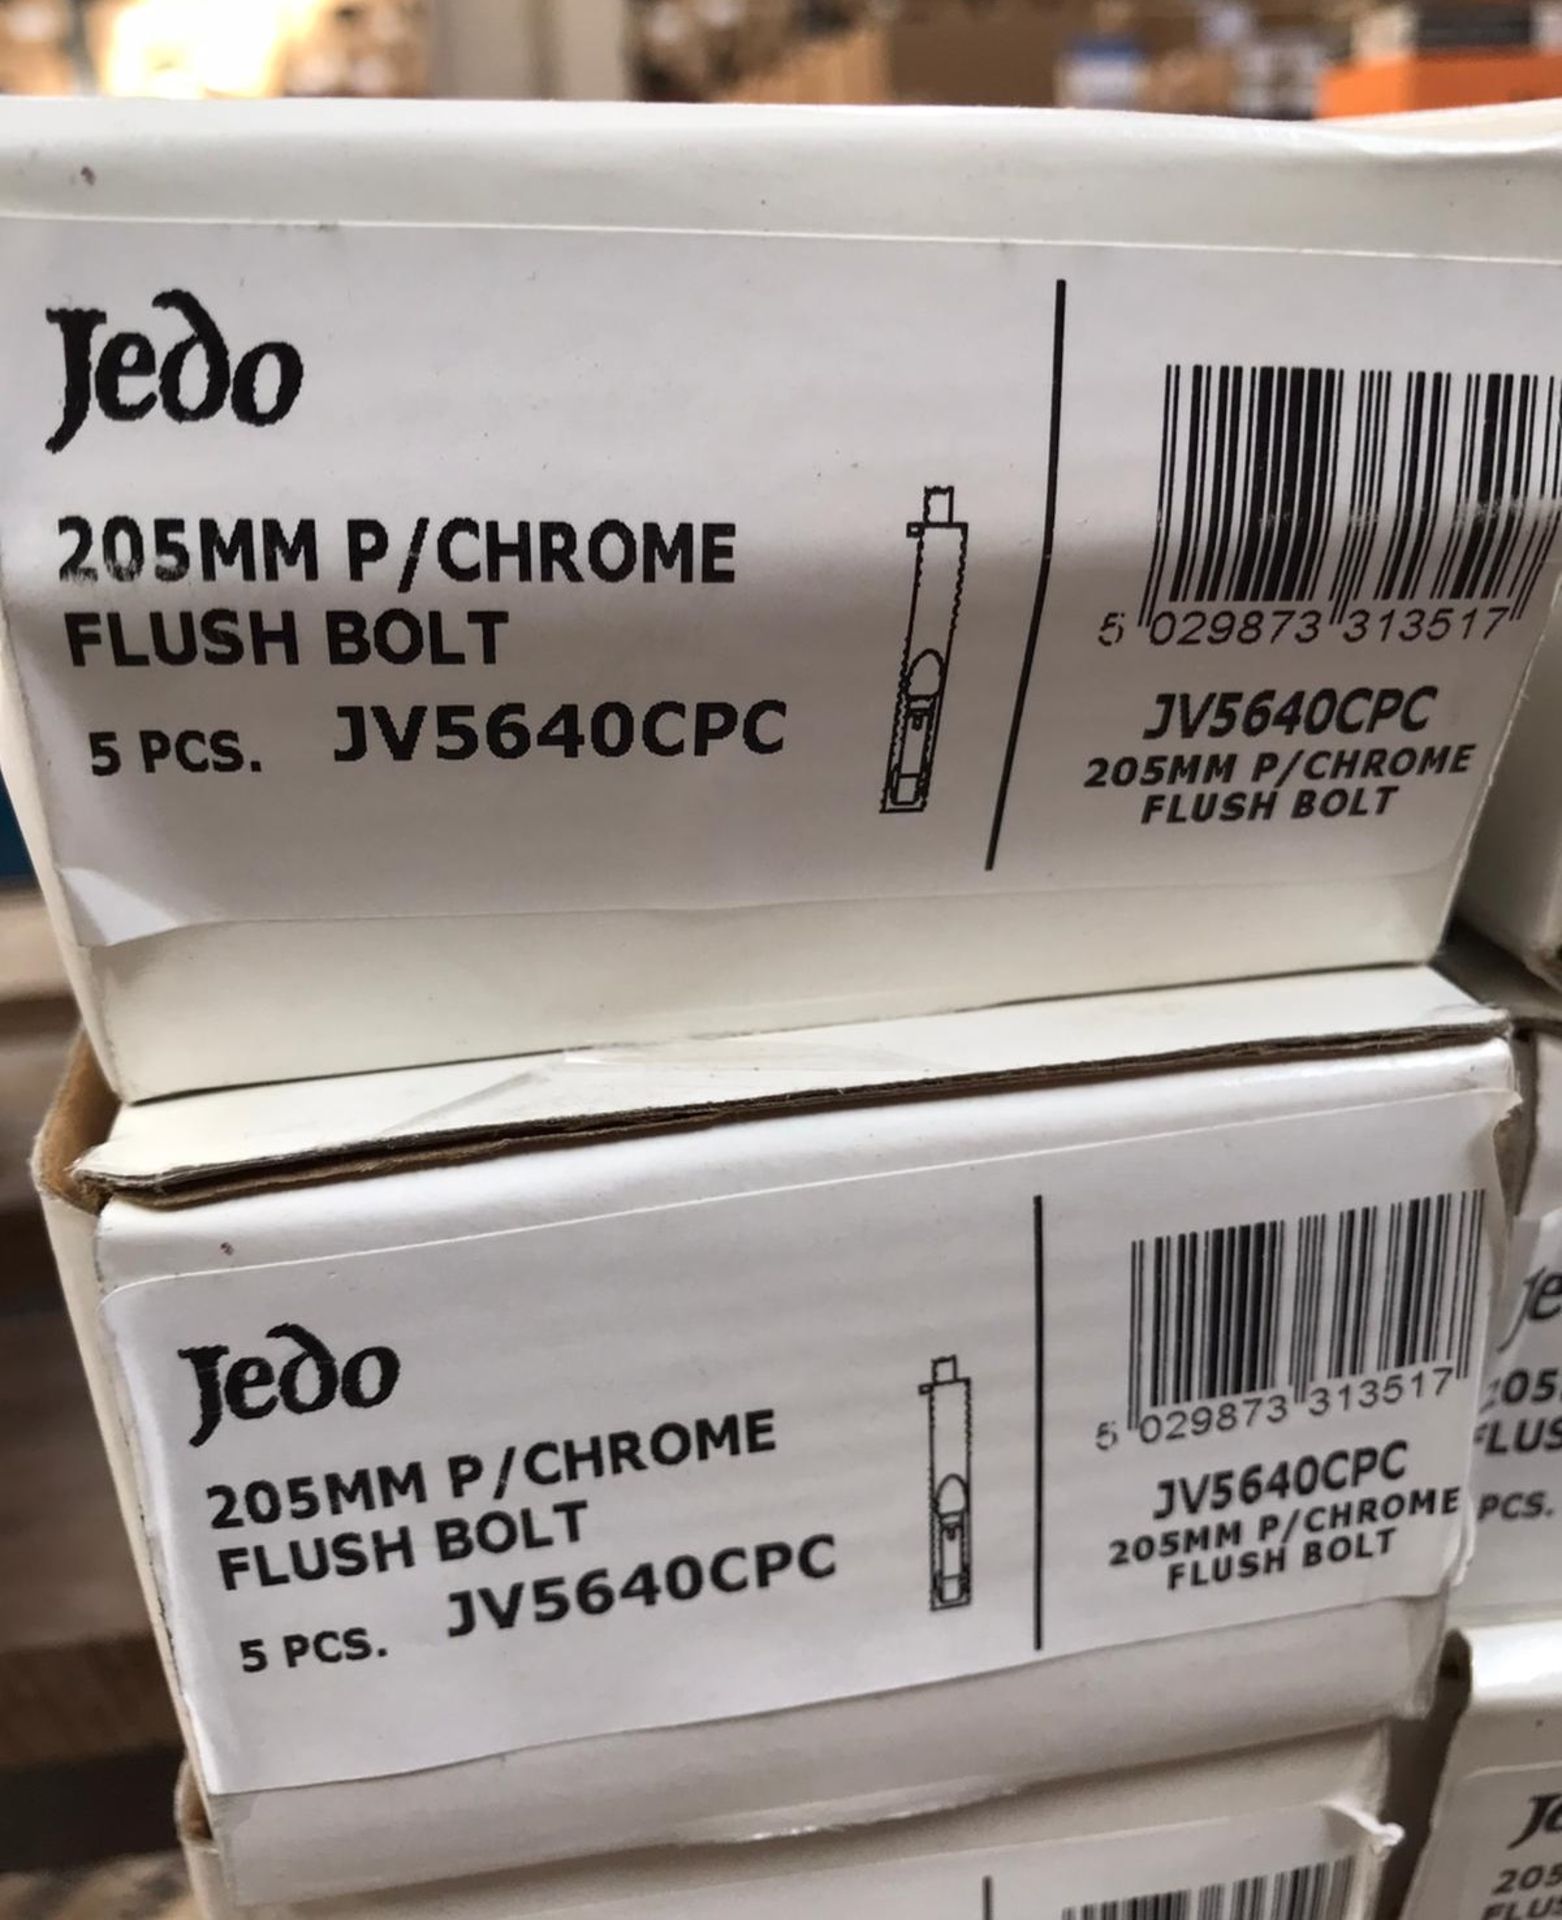 30 x Jedo 205mm Plished Chrome Flush Bolts - Brand New Stock - Product Code: JV5640CPC - RRP £ - Image 4 of 4